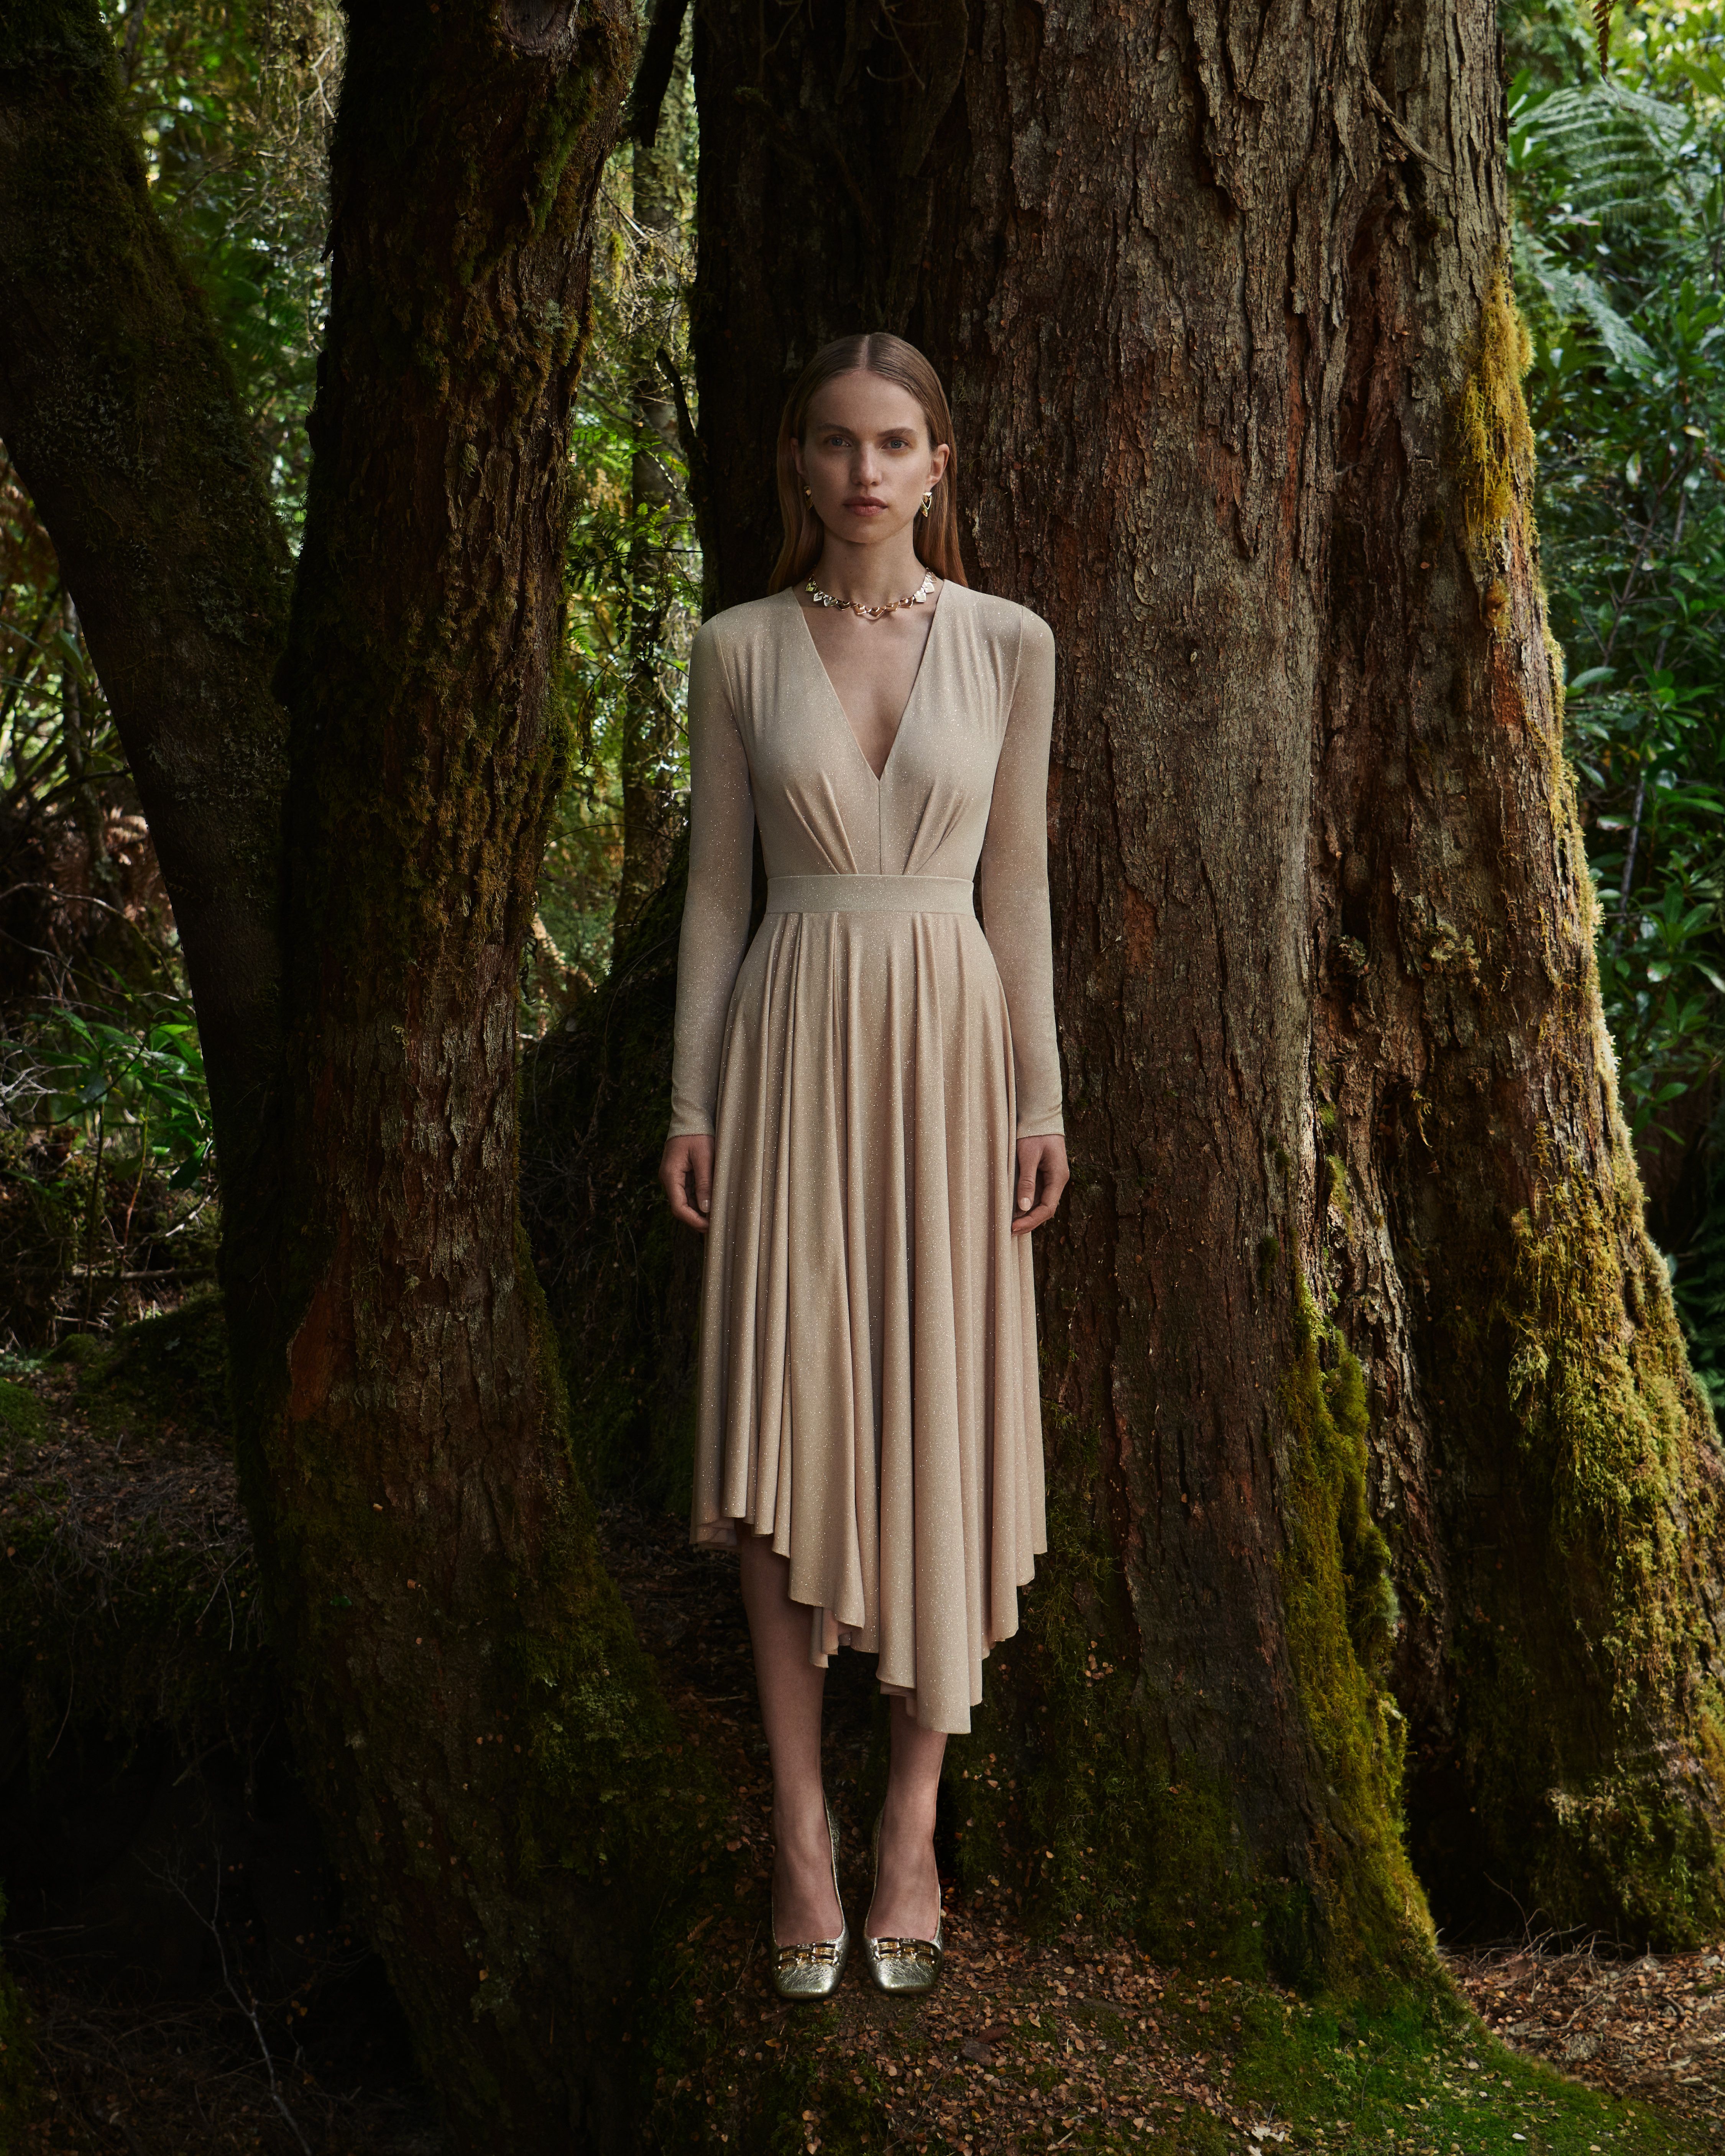 Sabine Glud standing in the forest wearing a beige v-neck top and skirt.